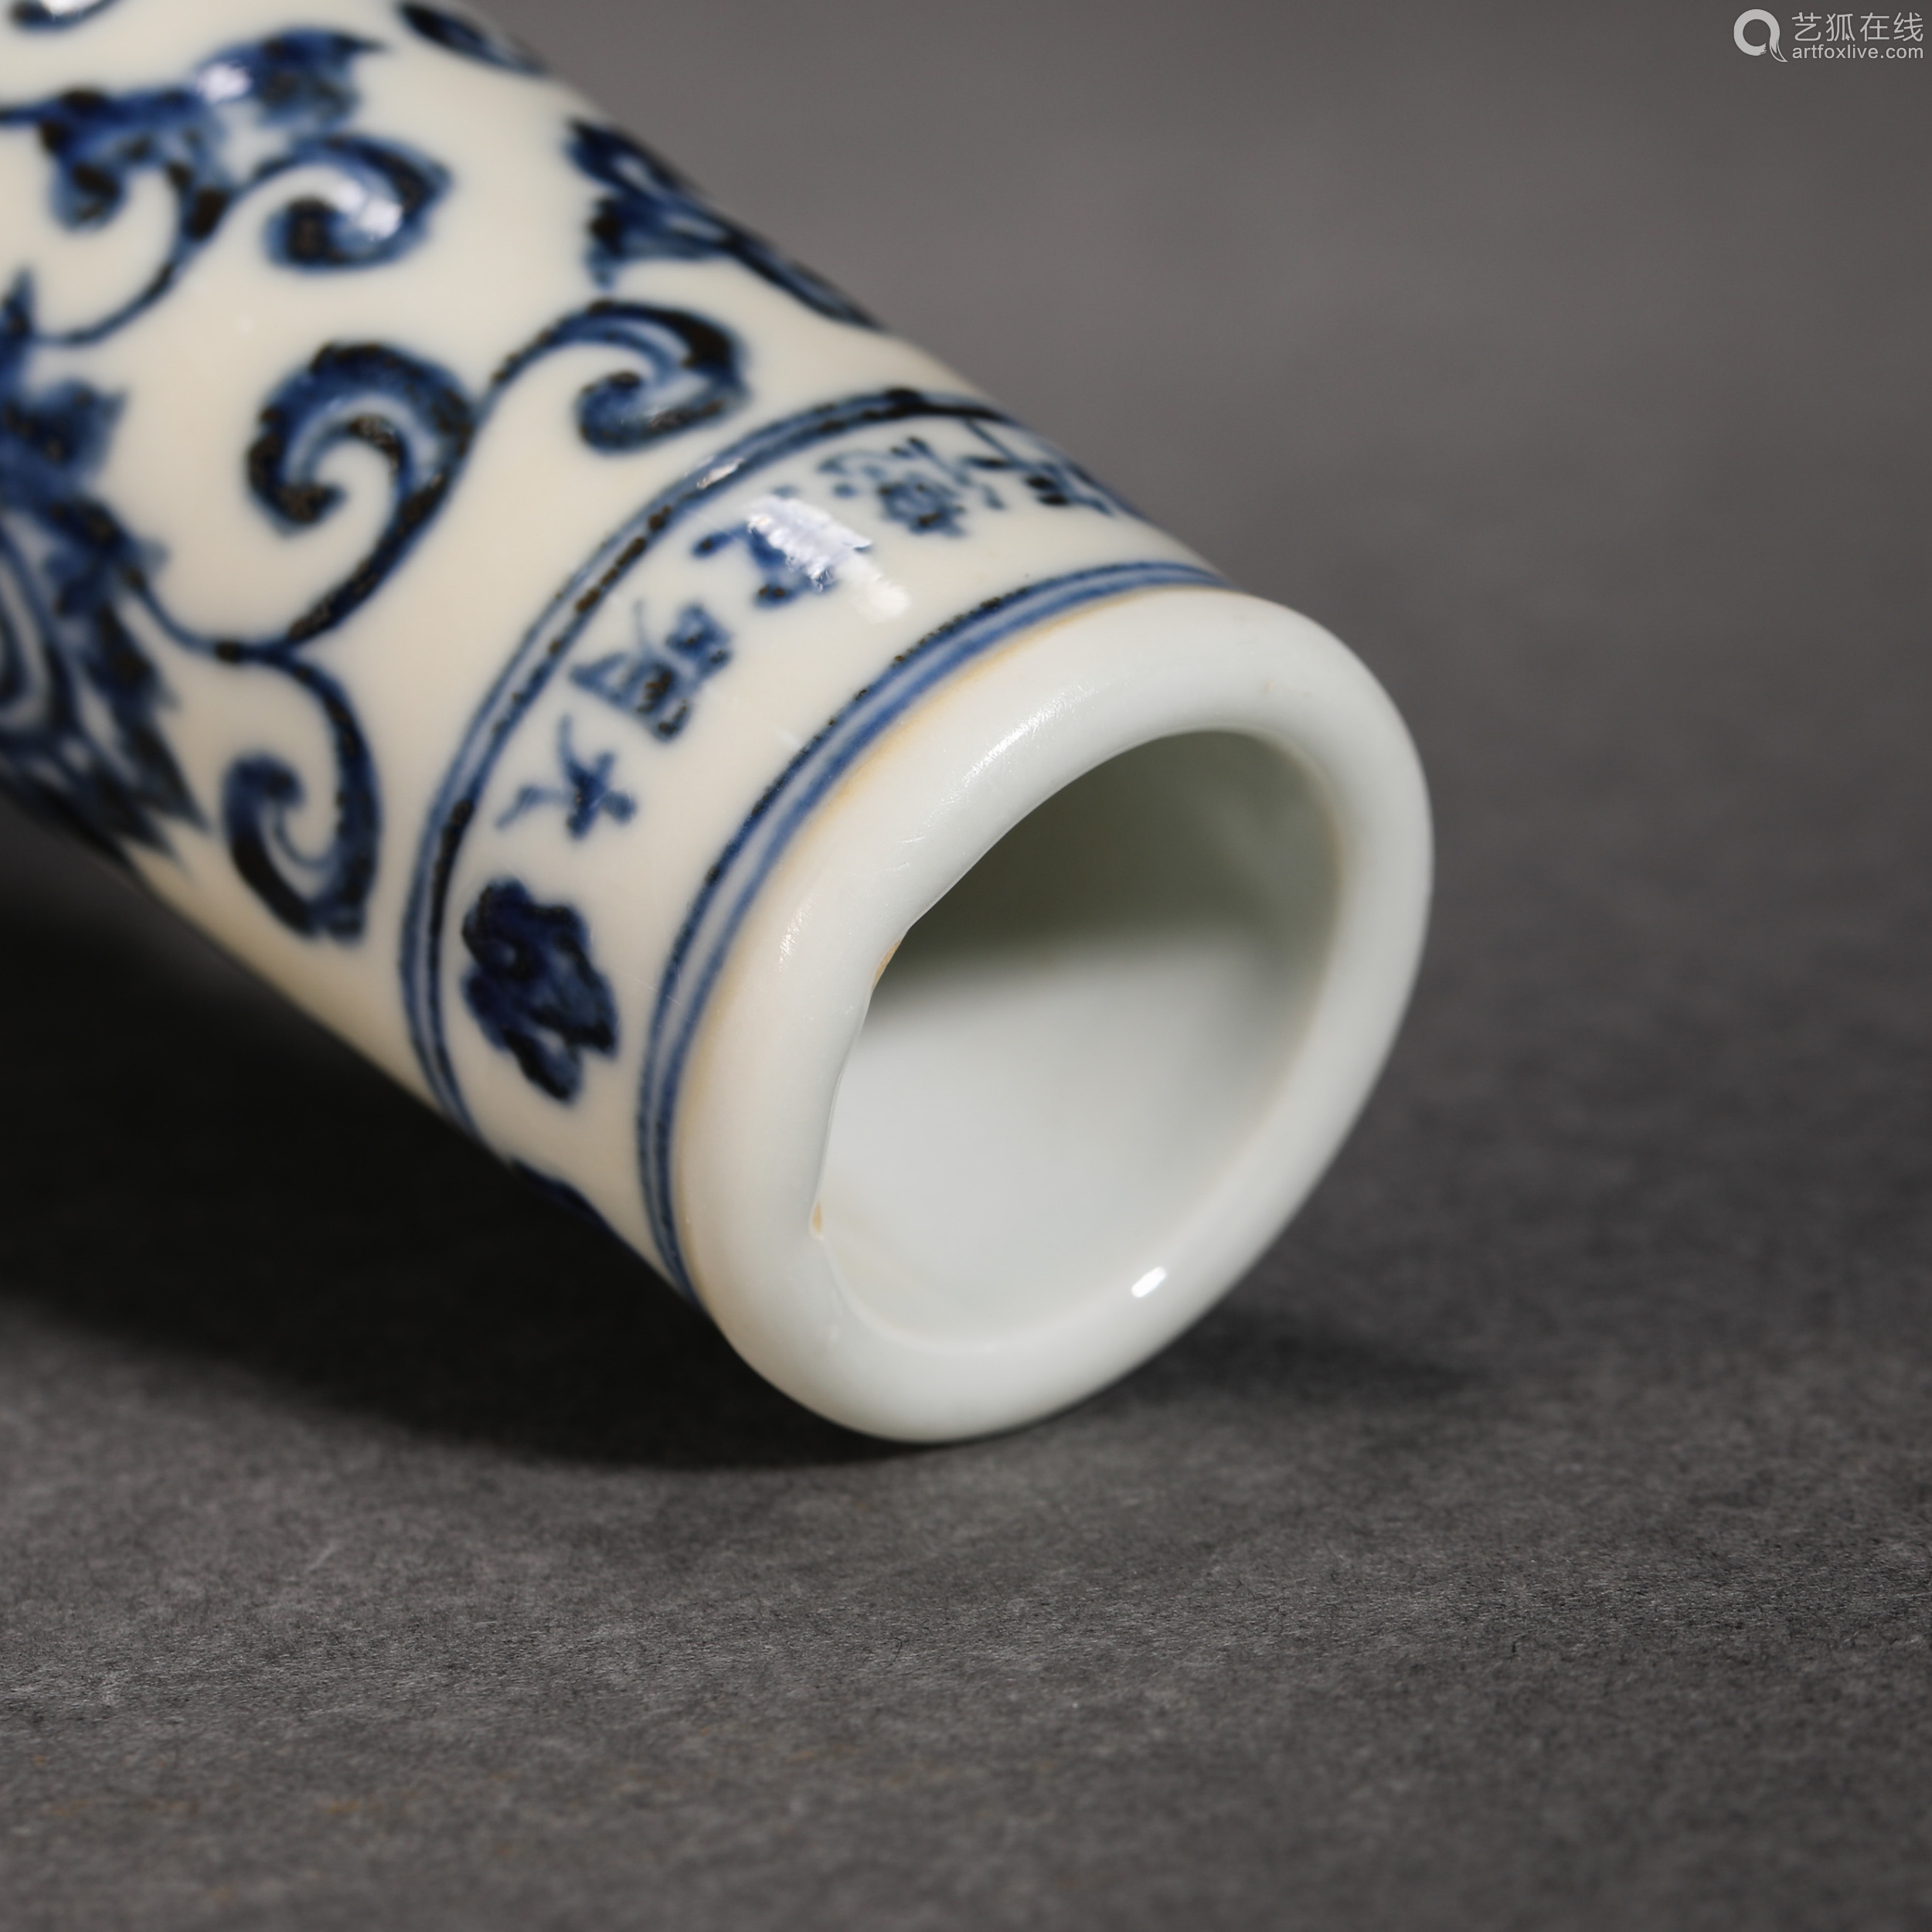 Qing Dynasty blue and white flower vase